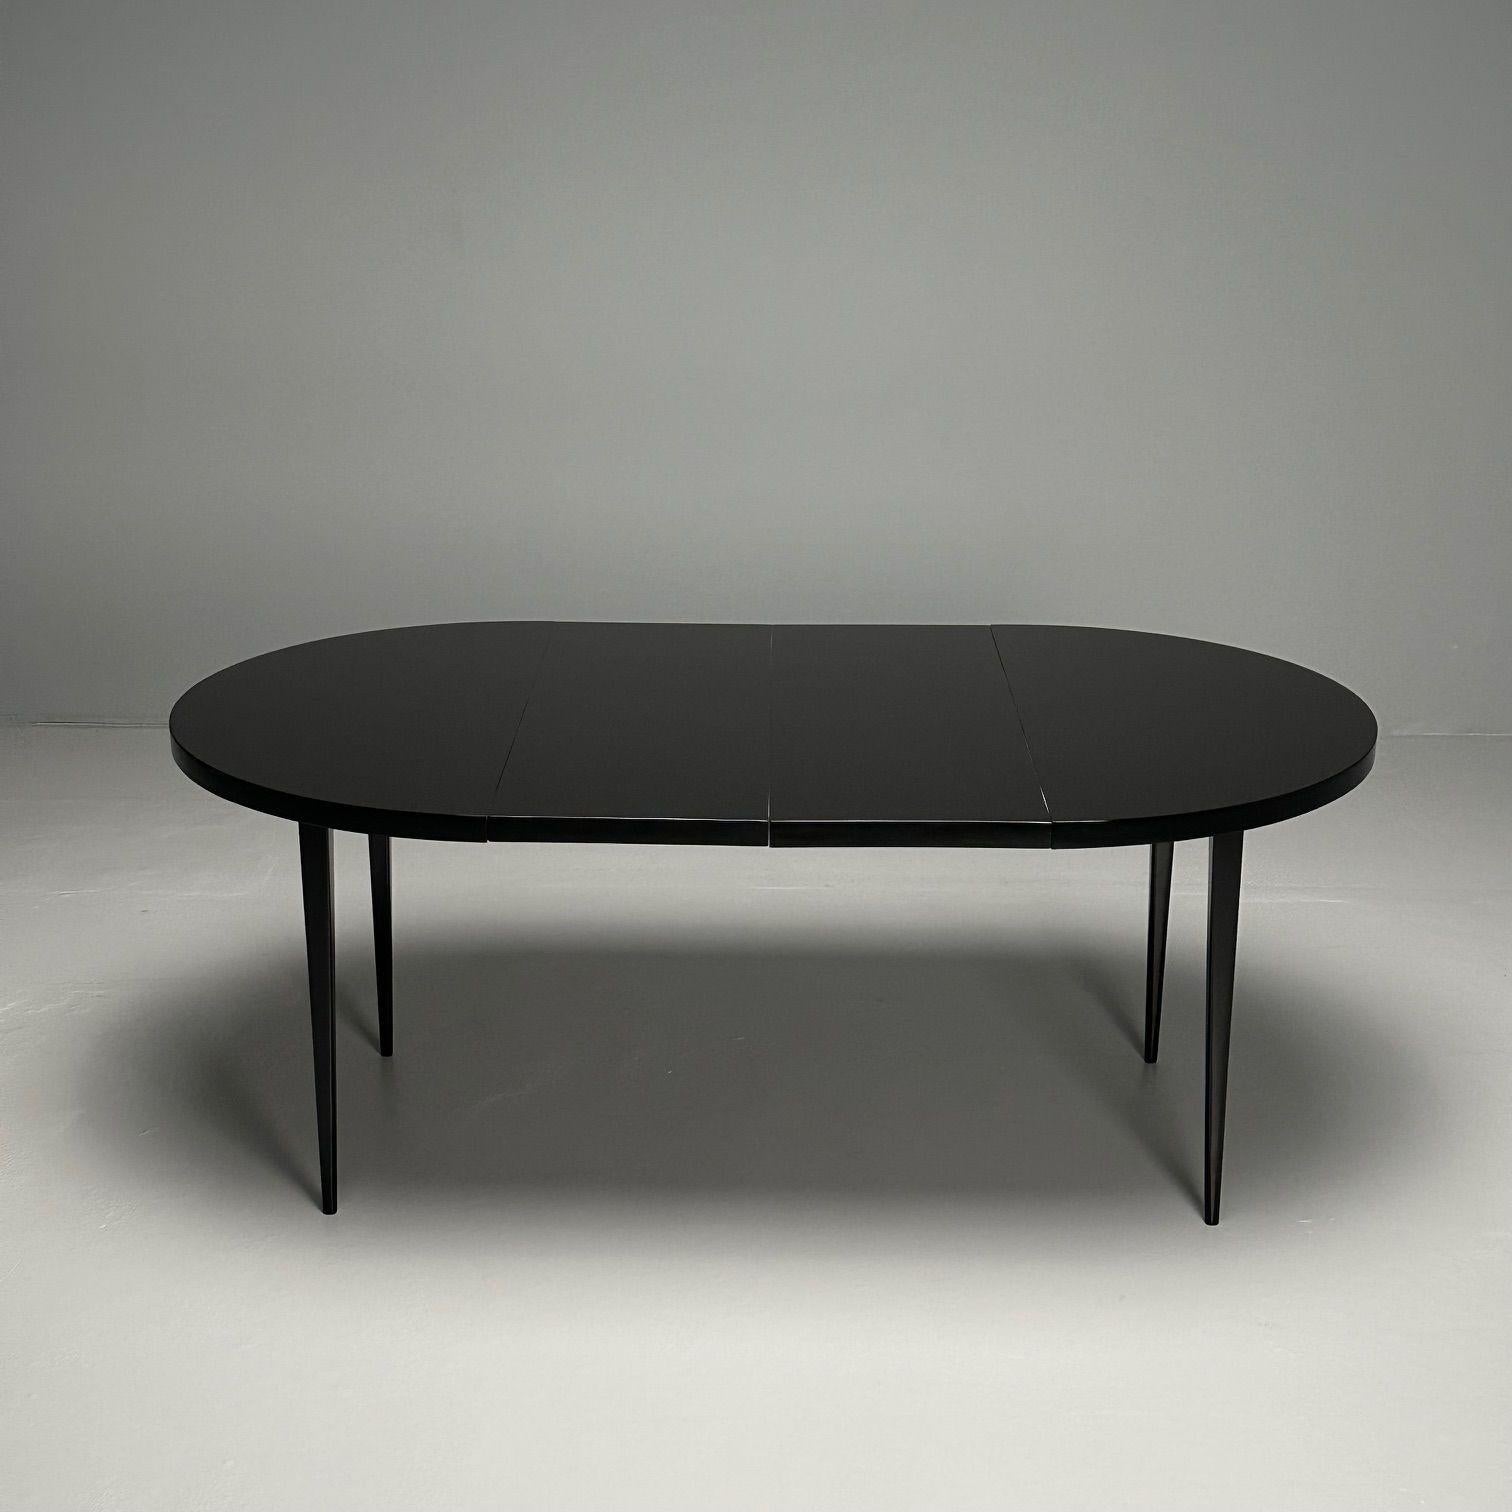 Wood Paul McCobb, Mid-Century Modern Planner Group Dining Table, Black Lacquer, 1950s For Sale